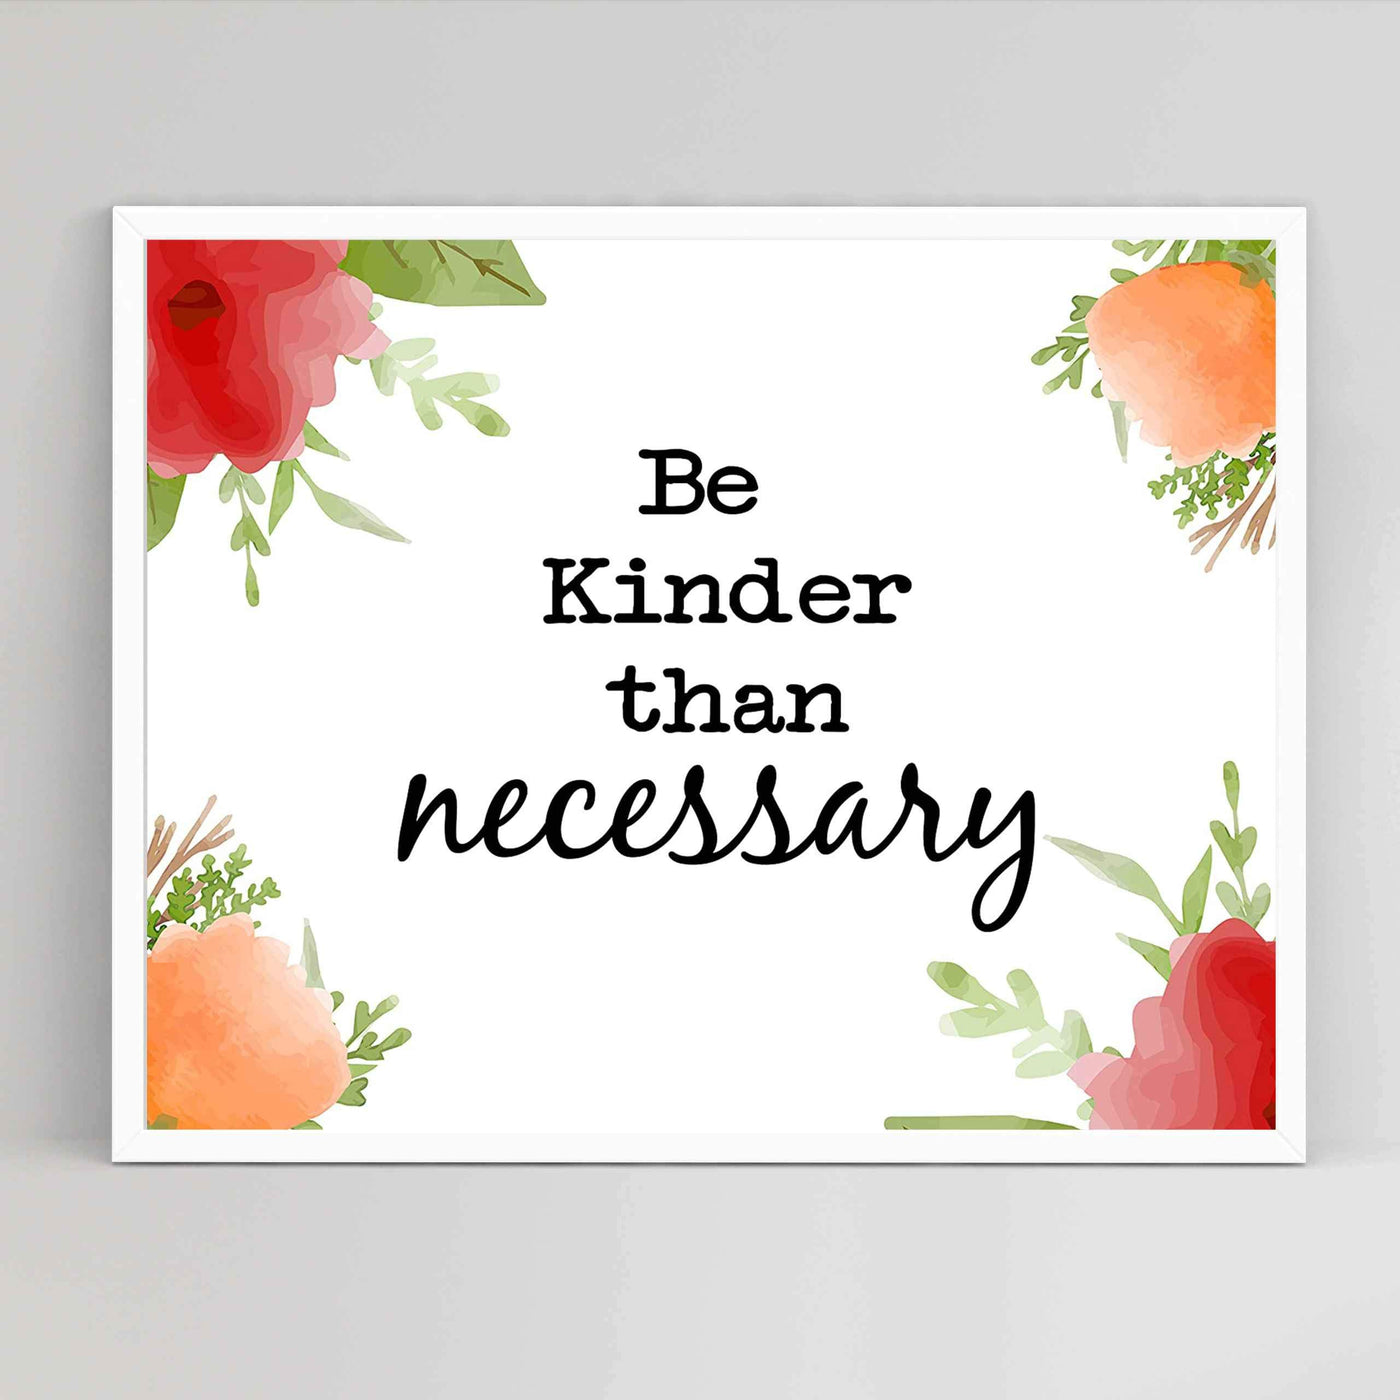 Be Kinder Than Necessary- Inspirational Wall Art- 10 x 8" Print Wall Decor-Ready to Frame. Modern Floral Typographic Print for Home-Office-School. Perfect Reminder to Be the Best You. A Great Gift!